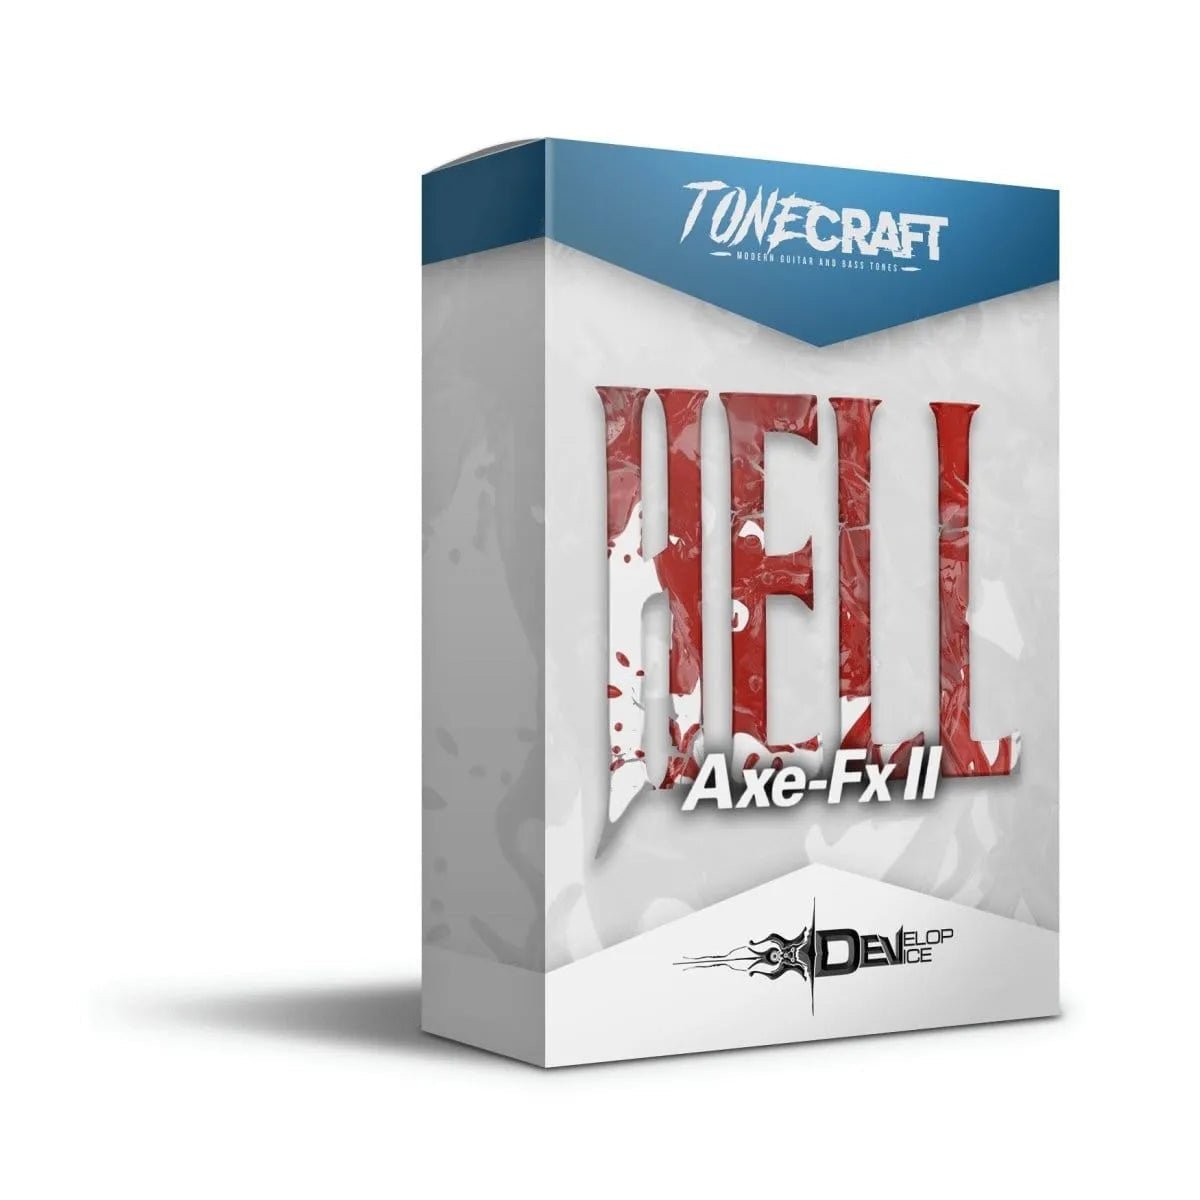 Hell for Fractal Axe-Fx II - Fractal Axe Fx II Presets by Develop Device